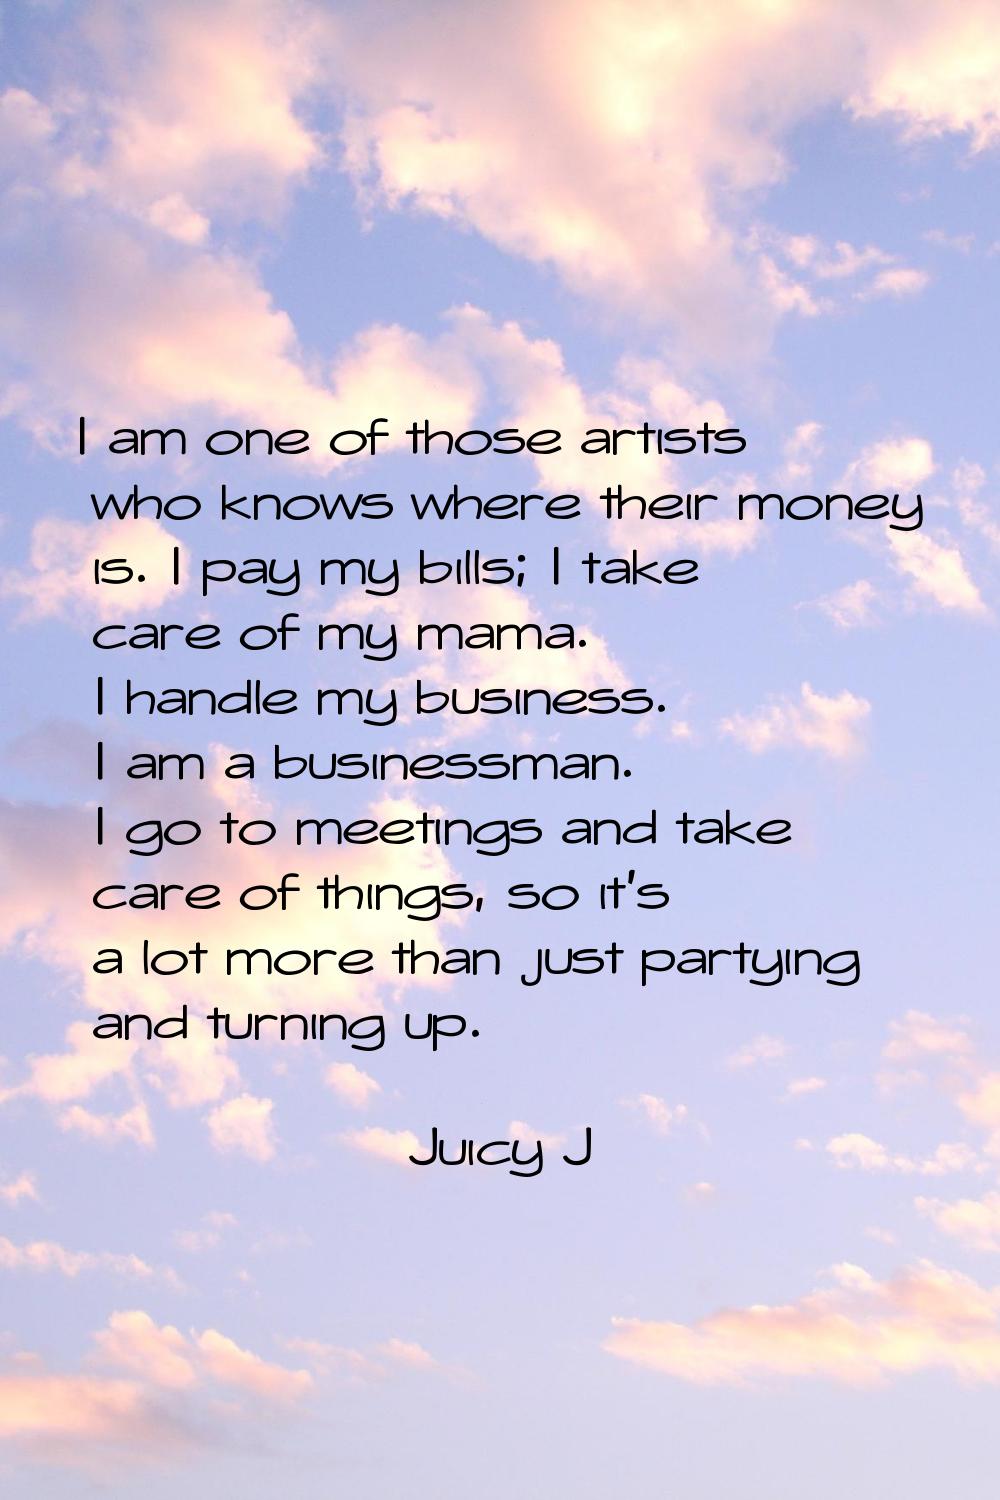 I am one of those artists who knows where their money is. I pay my bills; I take care of my mama. I